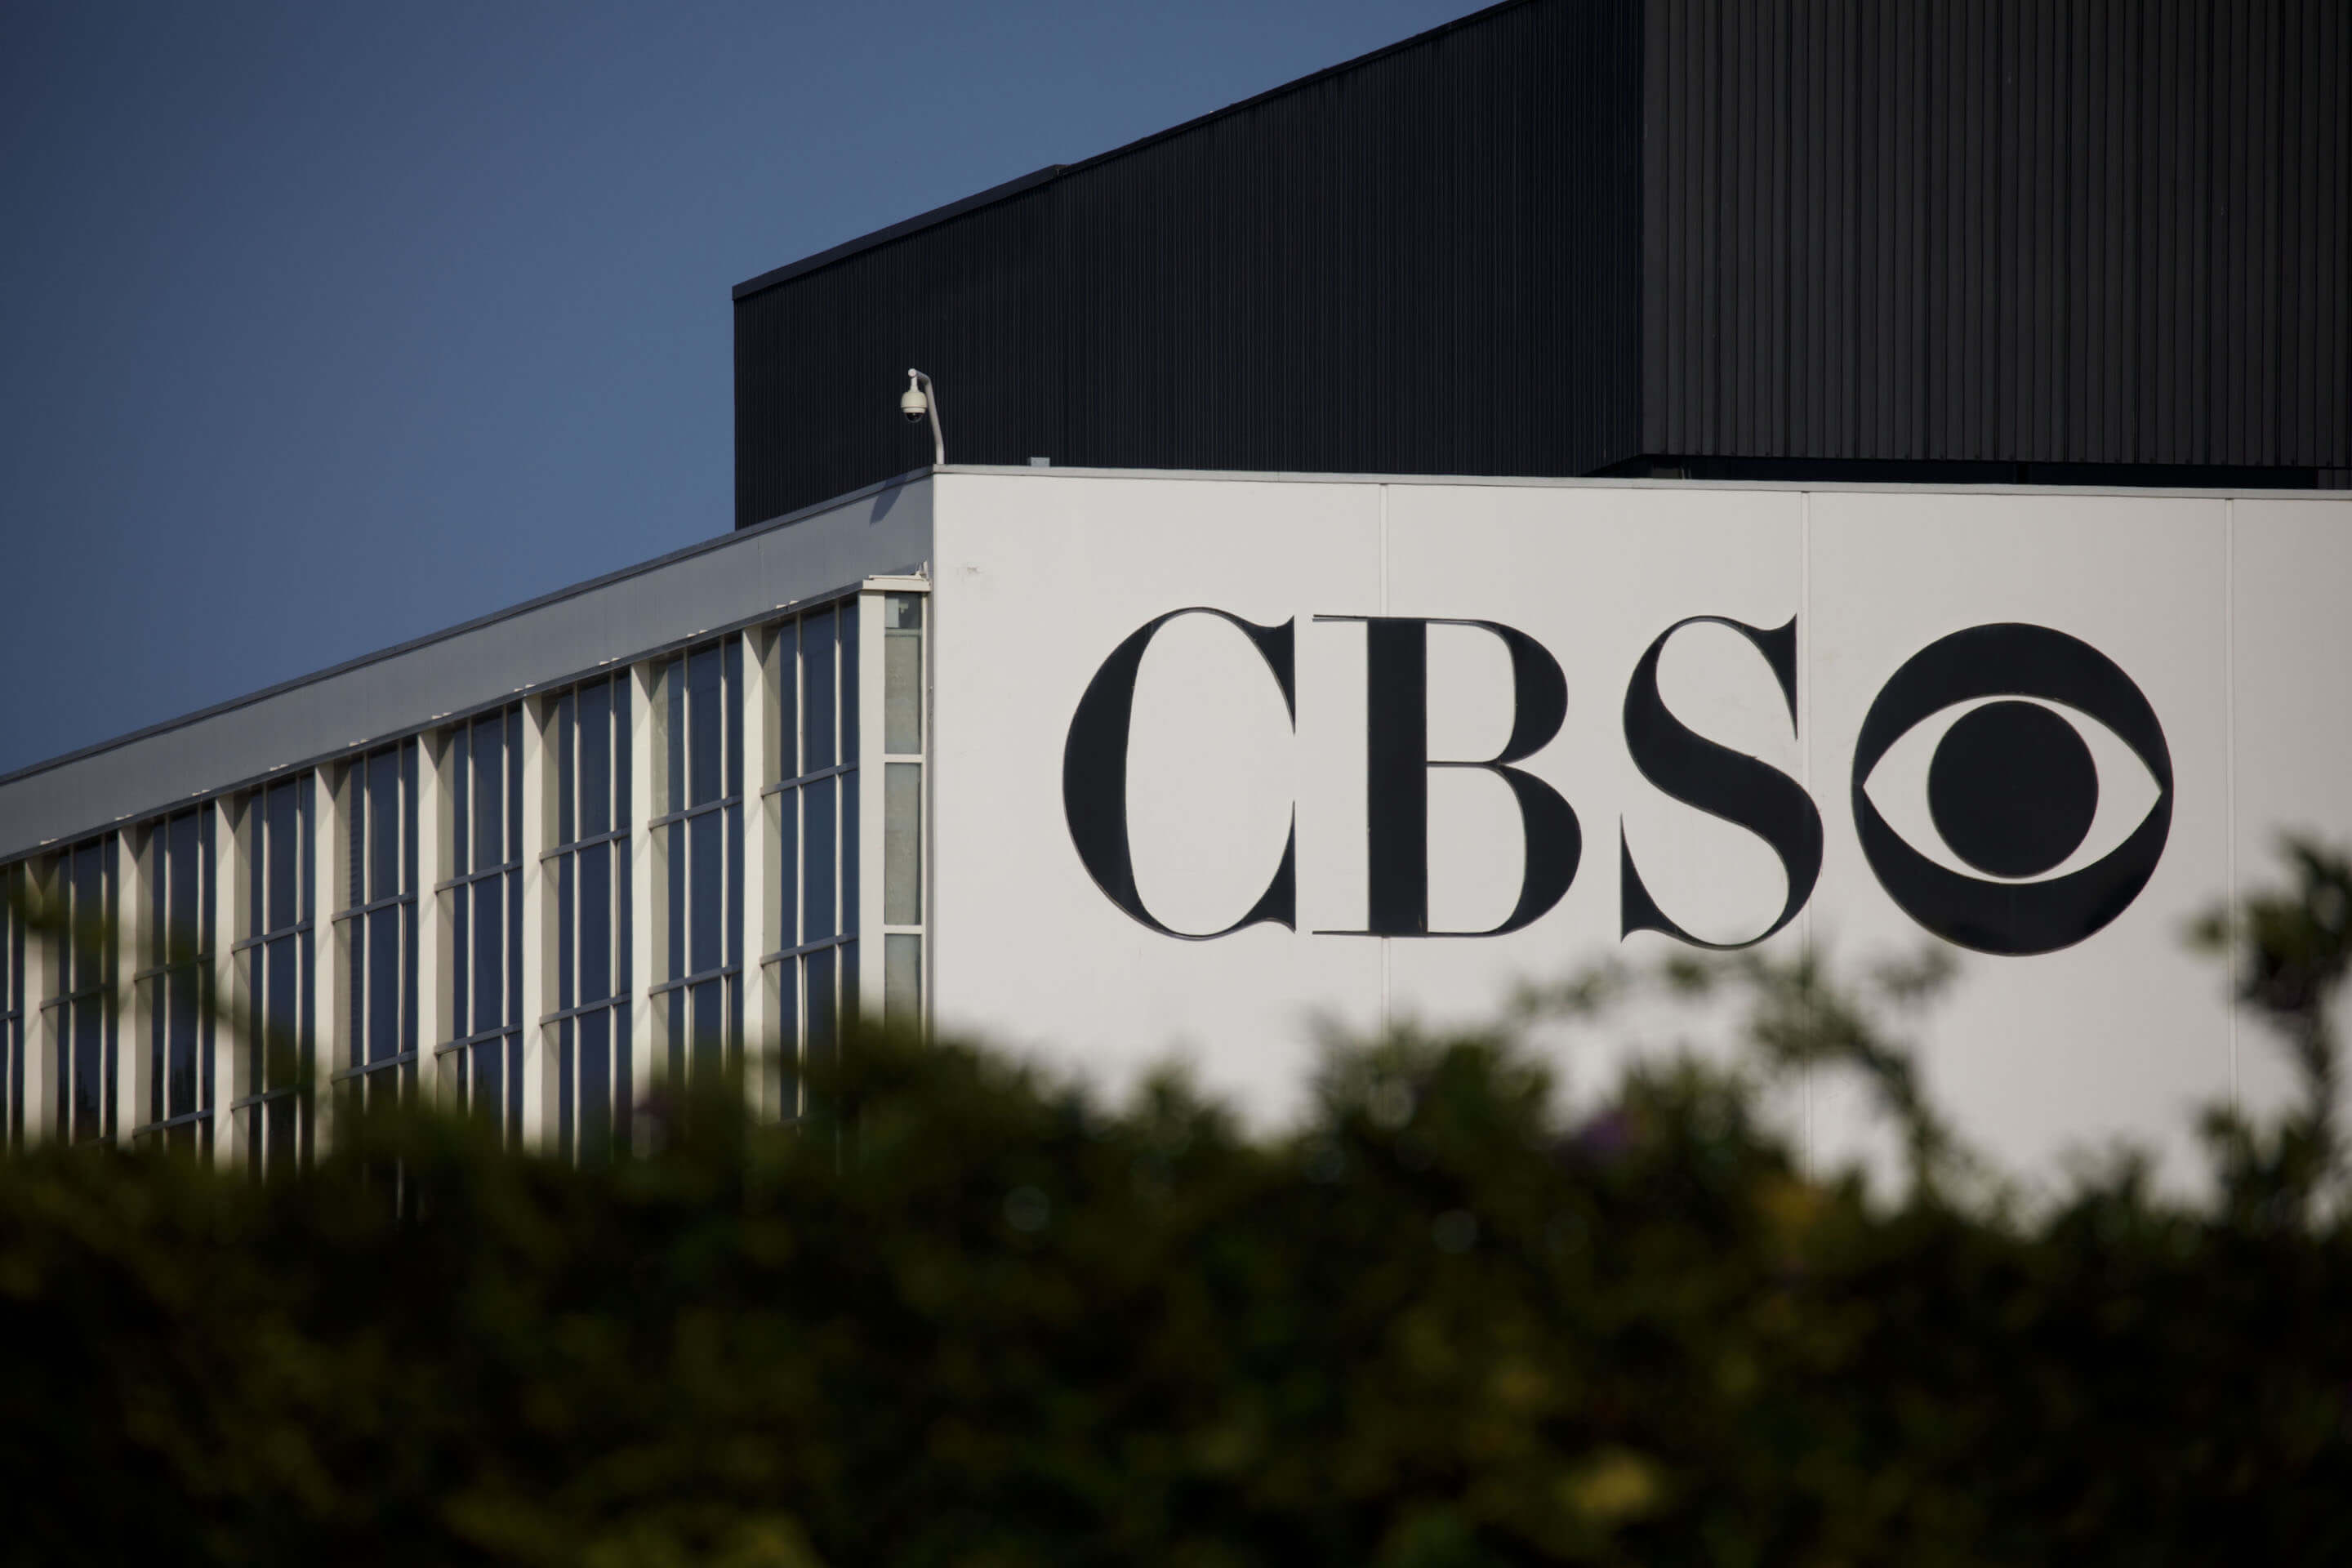 CBS to merge with Viacom in $11.7 billion deal